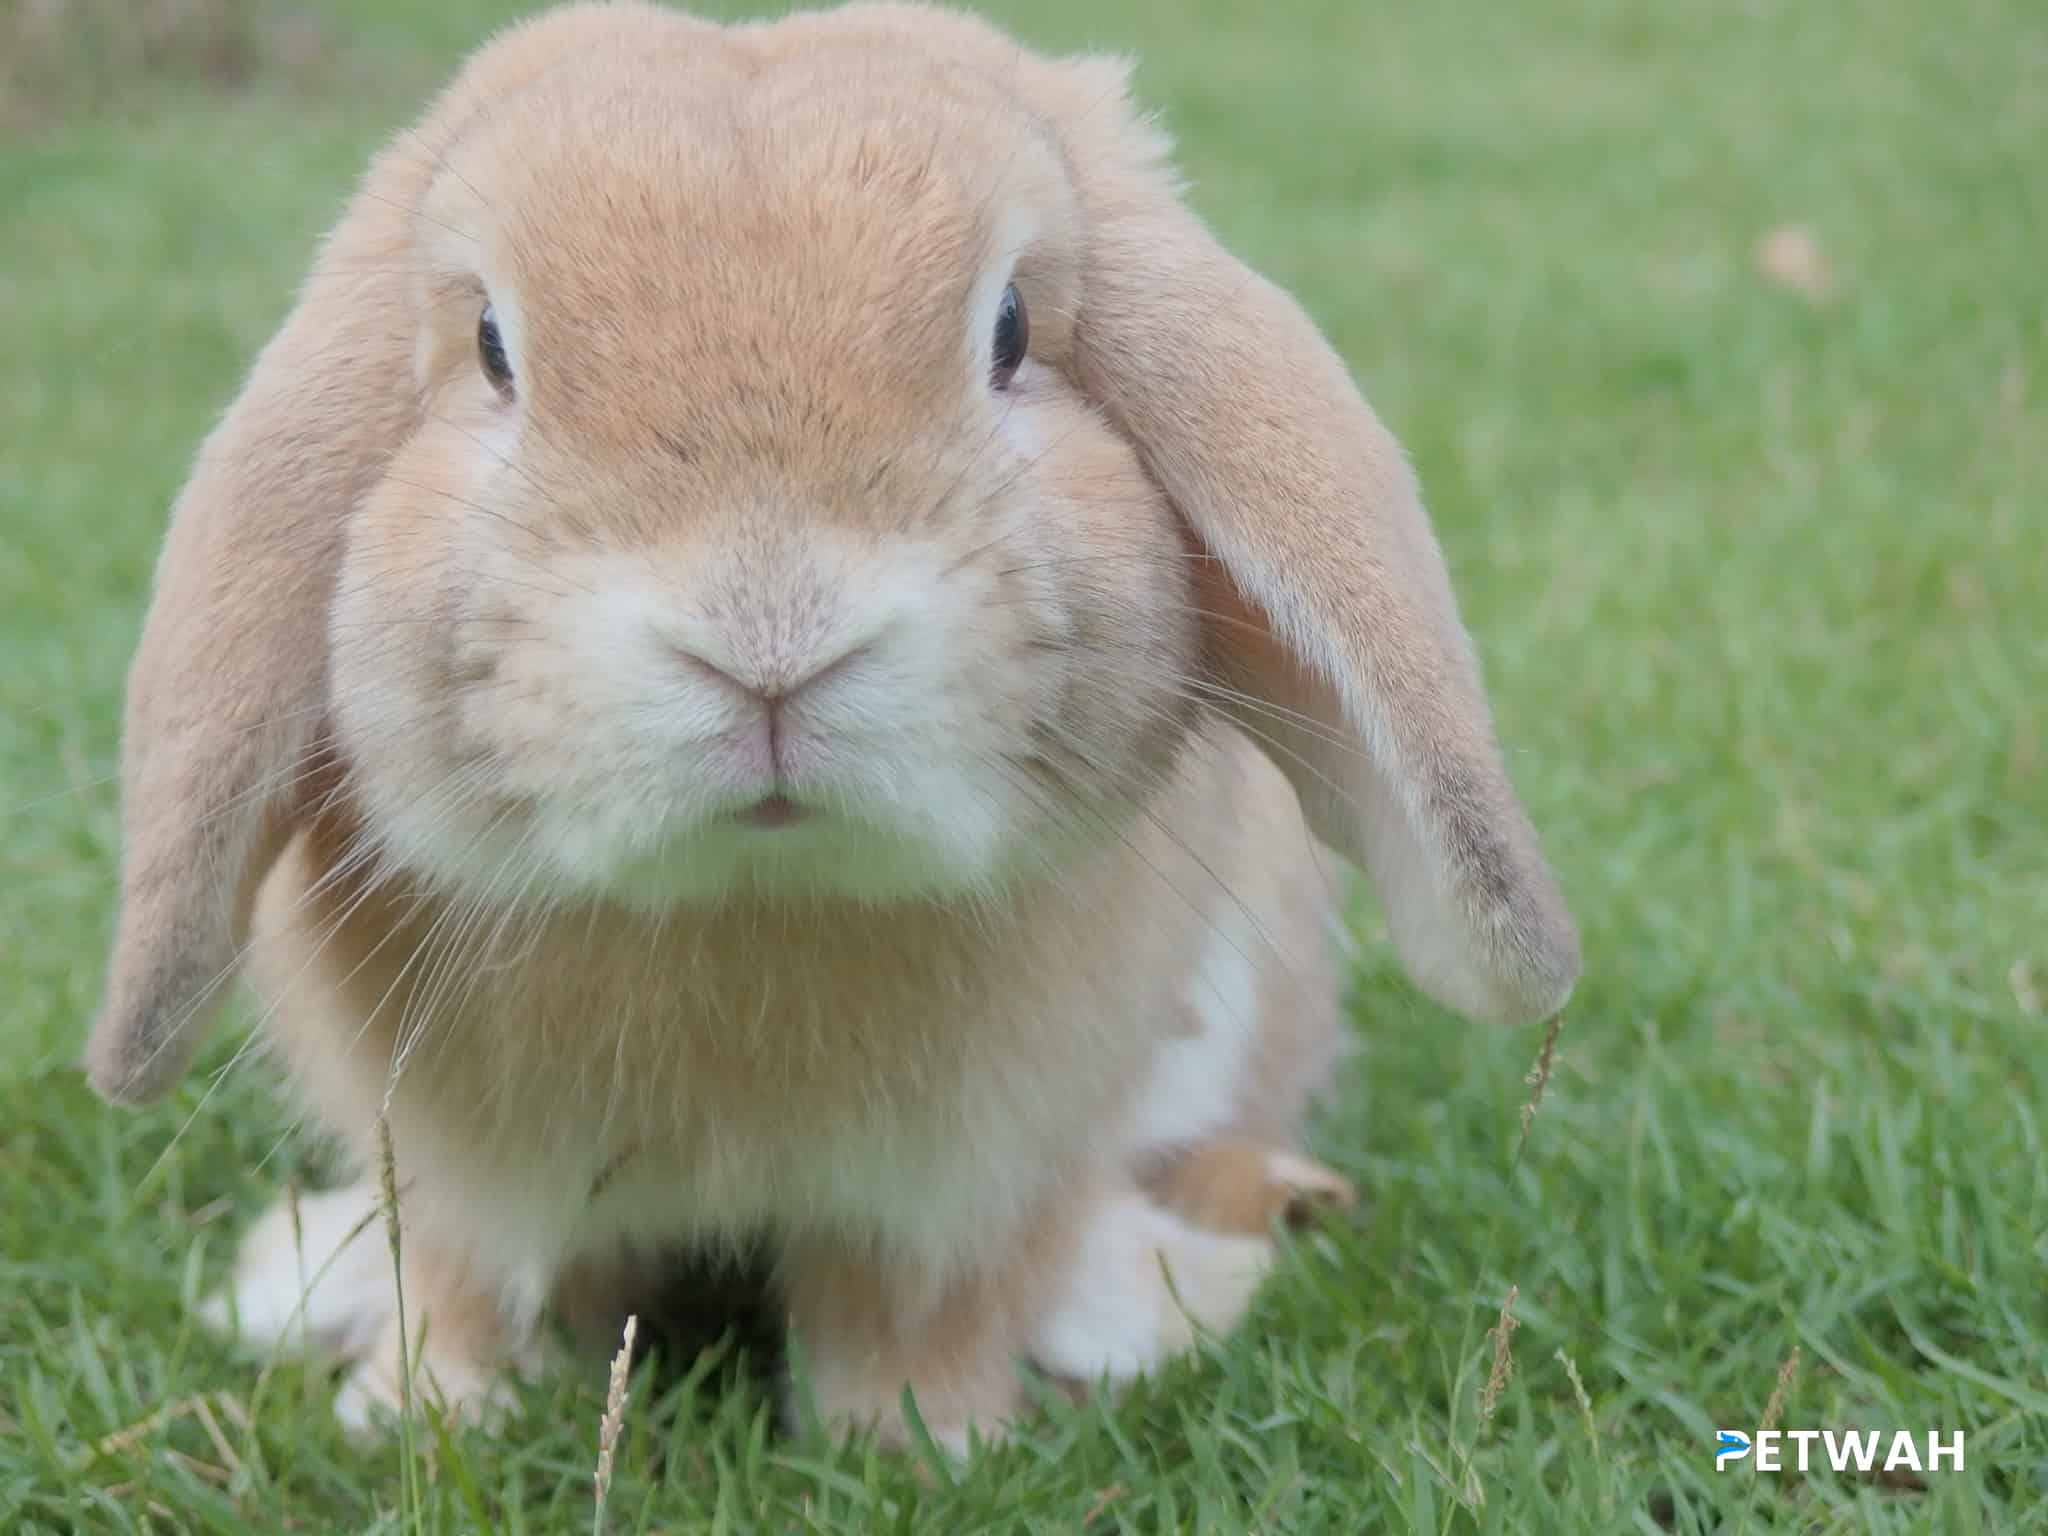 Essential Tips for Couples on Training and Litter Training Their Rabbit